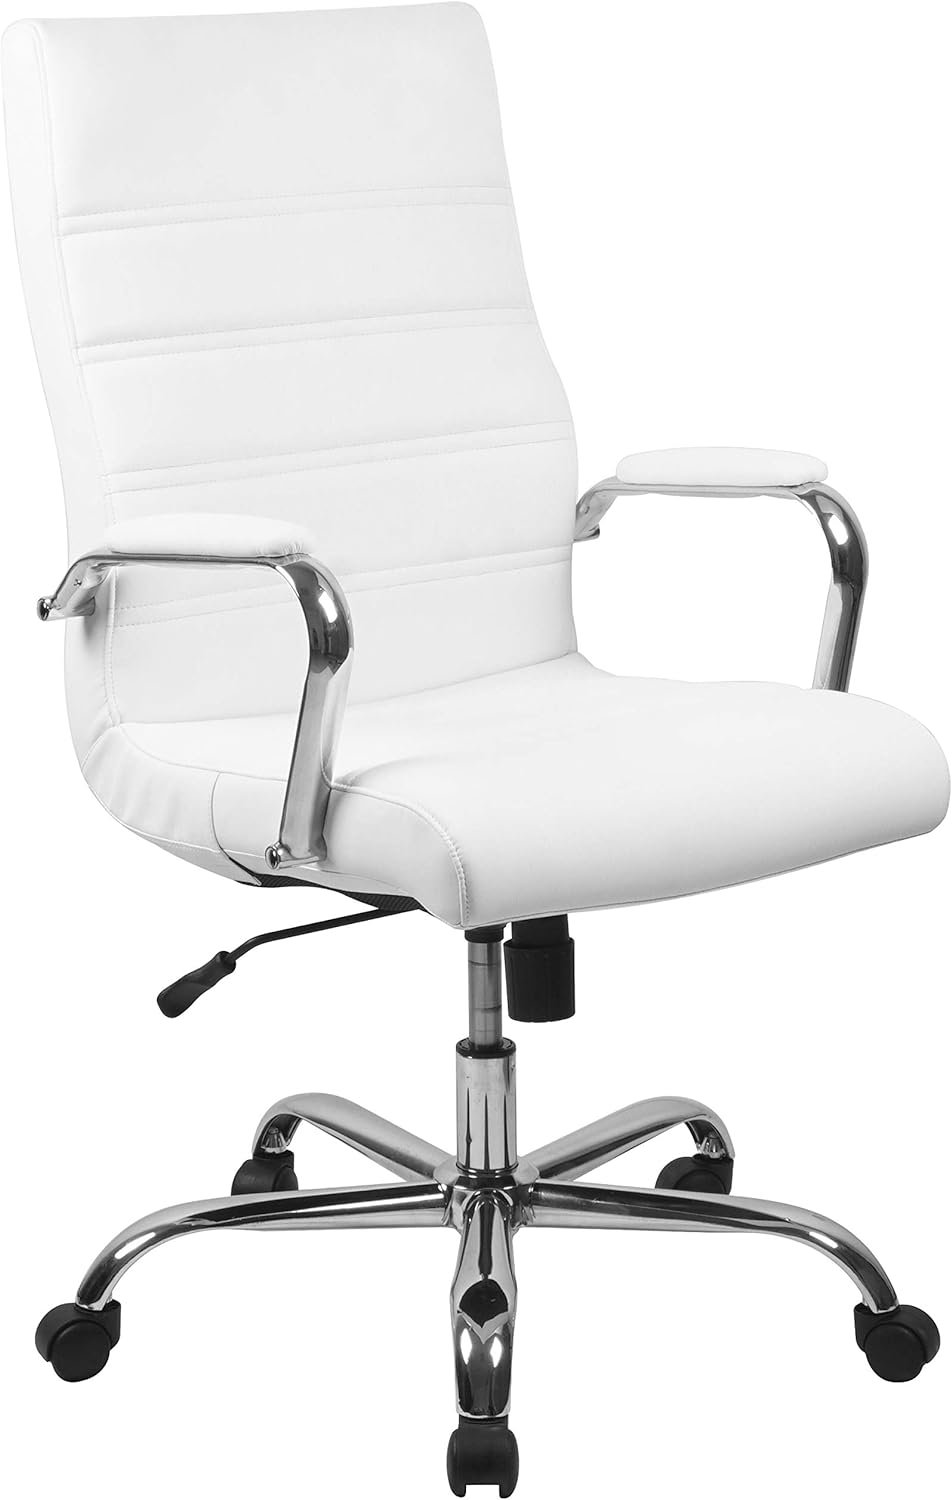 Flash Furniture Whitney High-Back Swivel LeatherSoft Desk Chair with Padded Seat and Armrests, Adjustable Height Padded Office Chair, White/Chrome